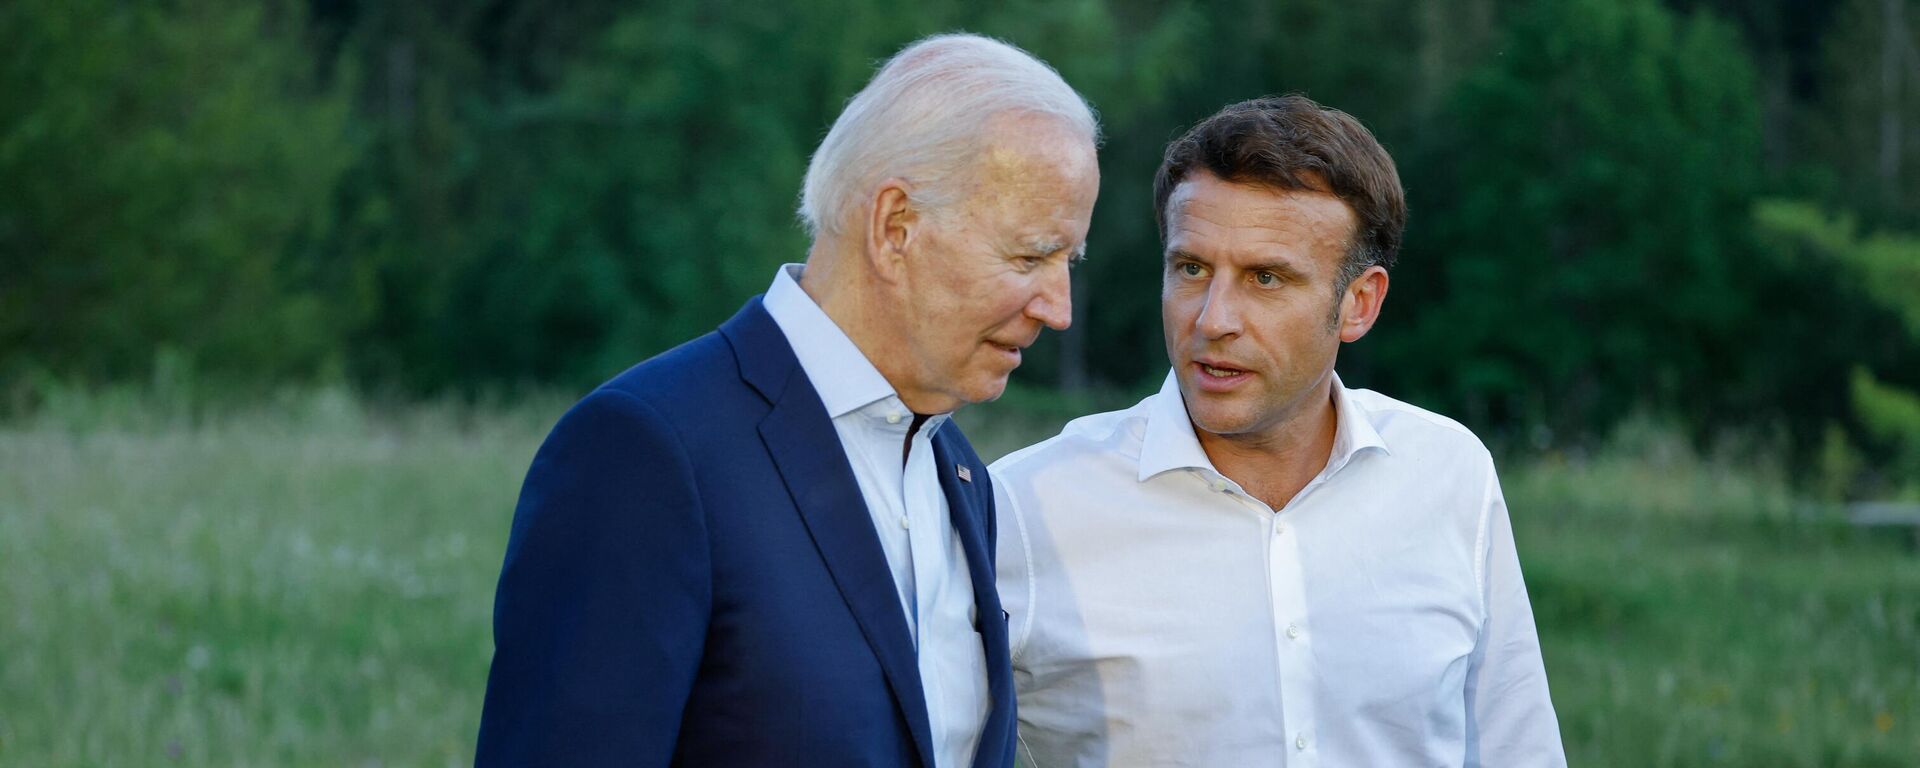 US President Joe Biden and French President Emmanuel Macron speak after posing for an informal group photo at a bench after a working dinner during the G7 Summit held at Elmau Castle, southern Germany on June 26, 2022. - Sputnik International, 1920, 02.12.2022